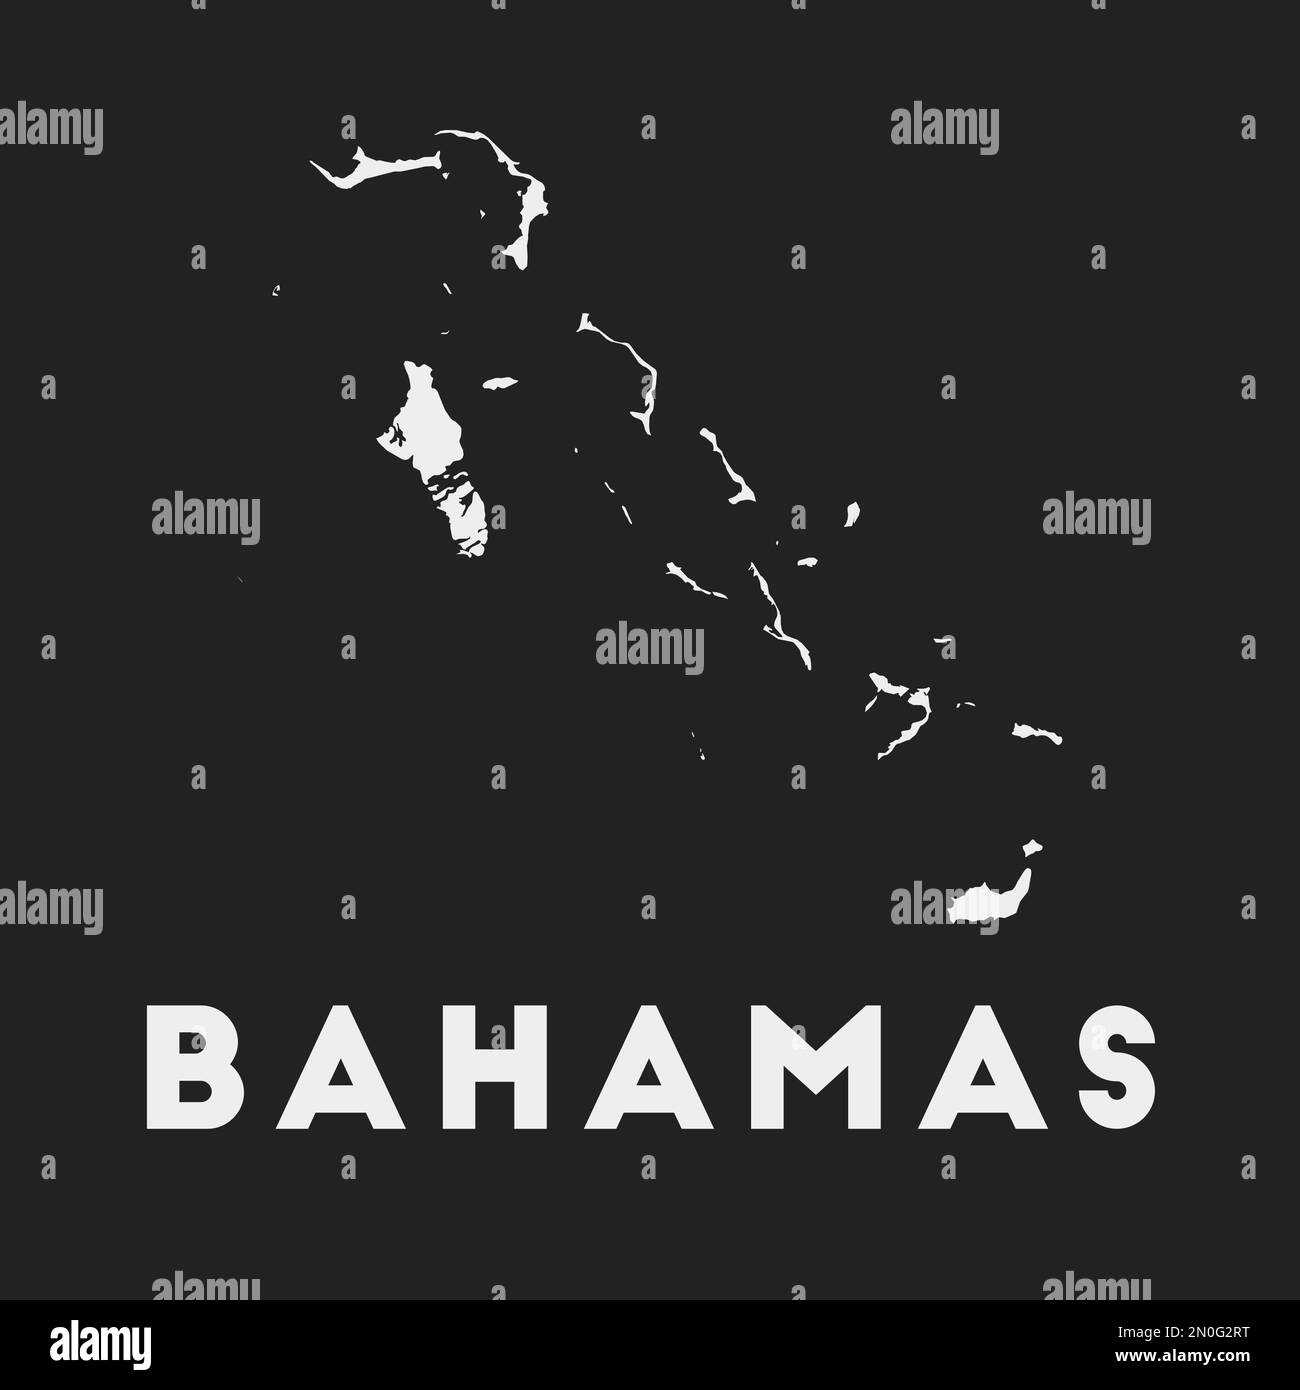 Bahamas icon. Country map on dark background. Stylish Bahamas map with country name. Vector illustration. Stock Vector